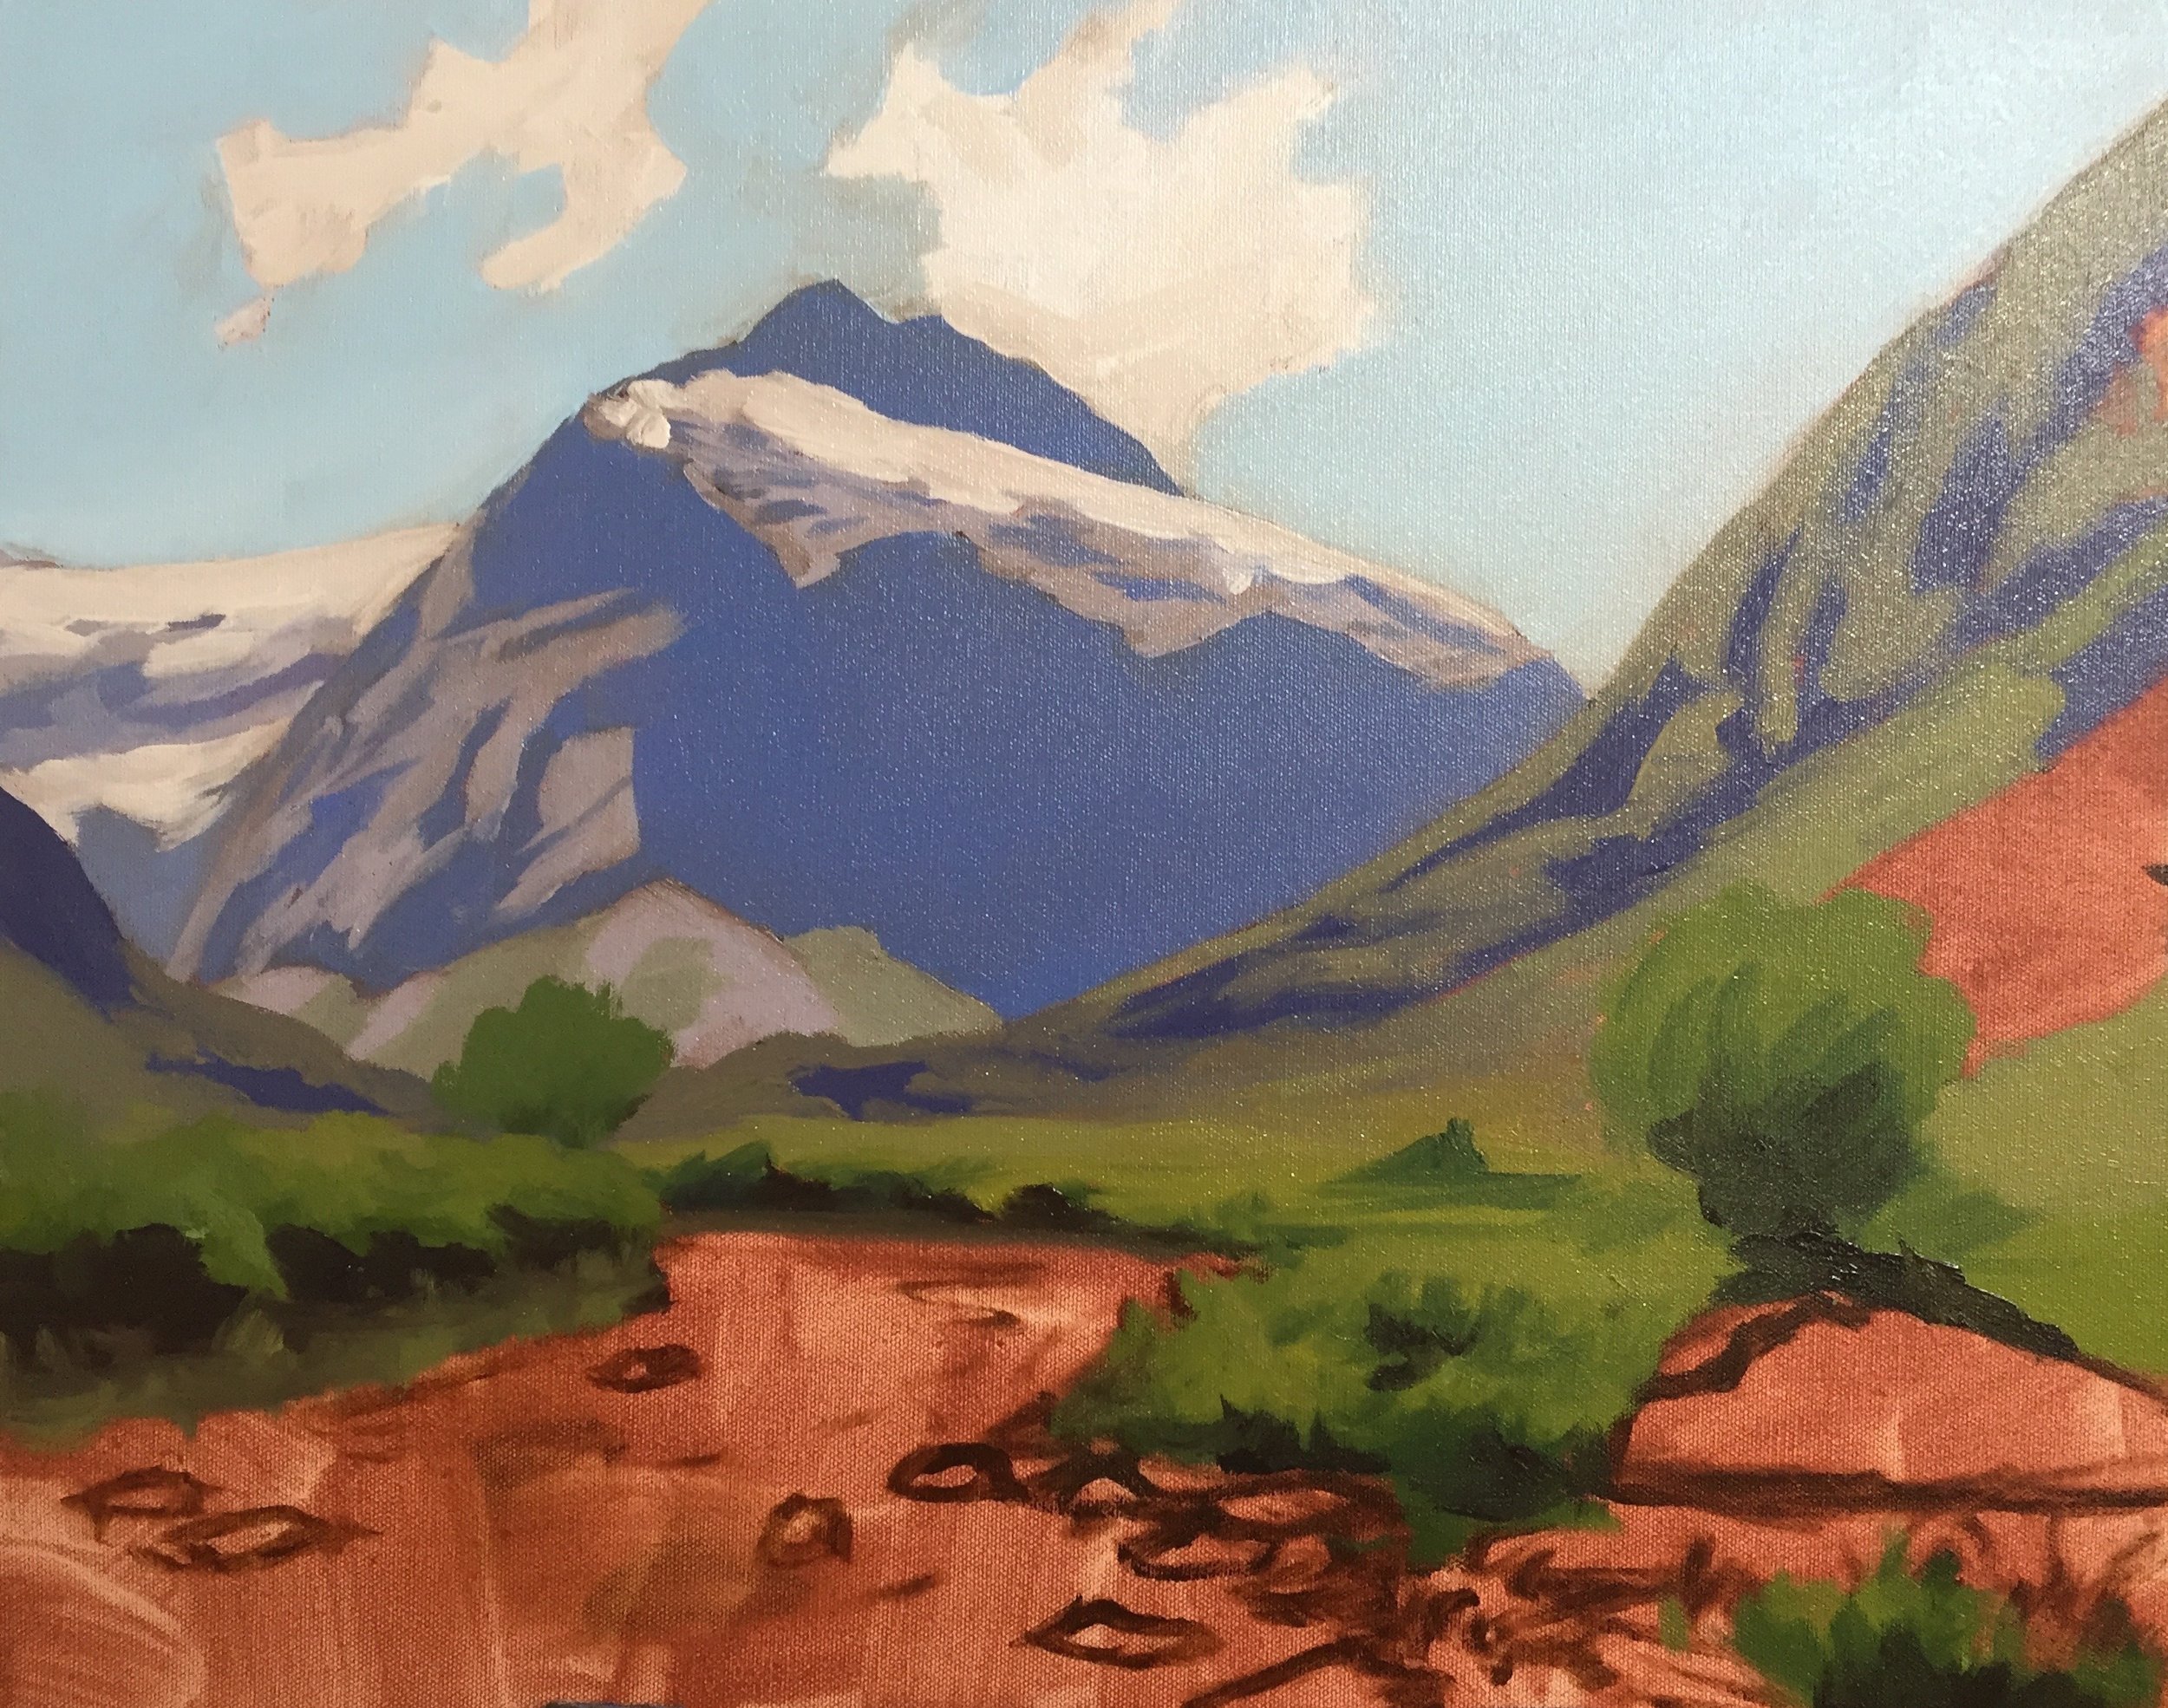 How to Paint a Mountain Landscape - A Step by Step Guide